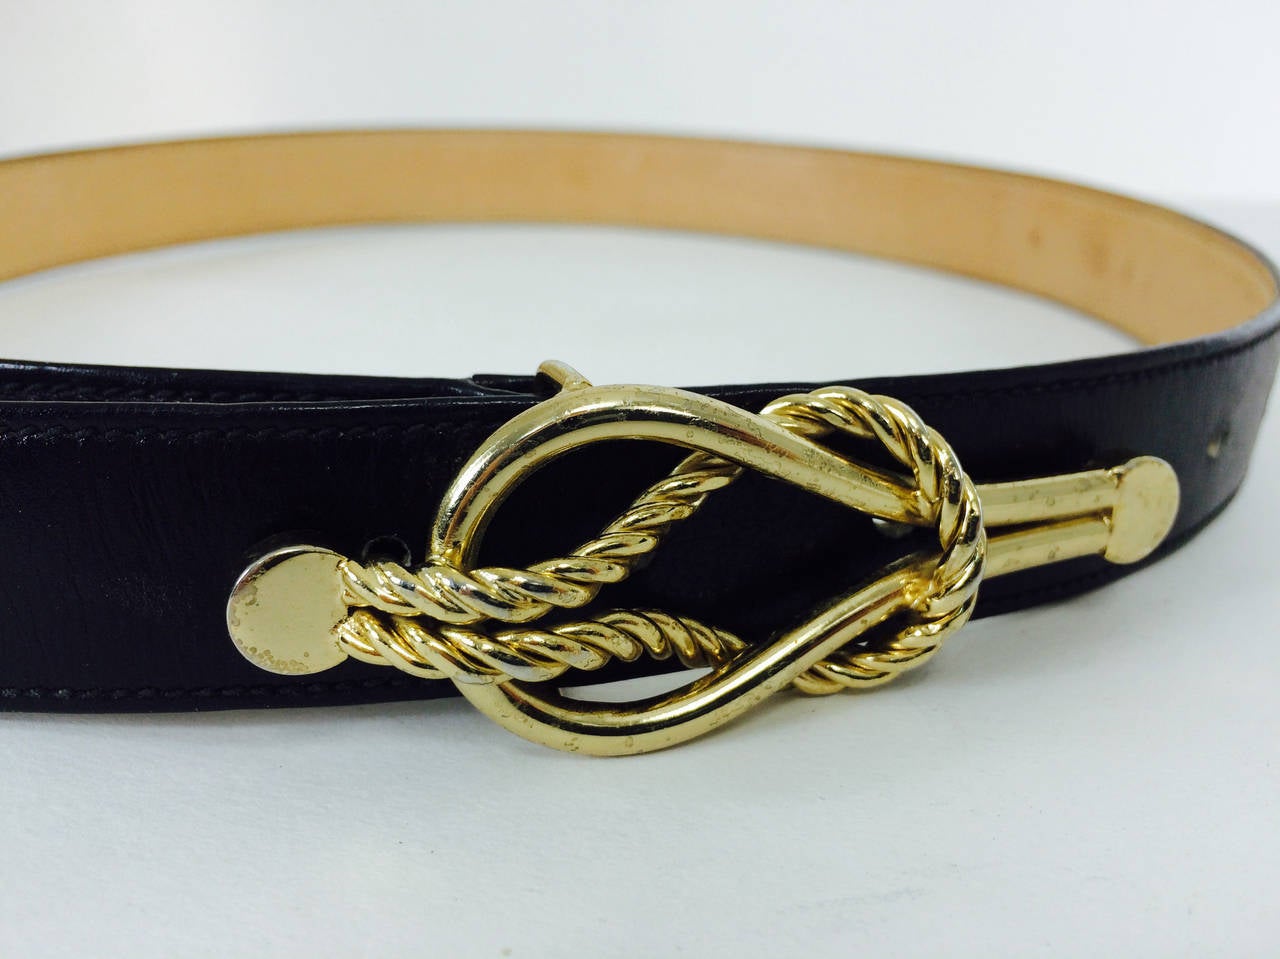 Gucci black box calf leather belt with gold harness appliques 28...In excellent barely worn condition...34